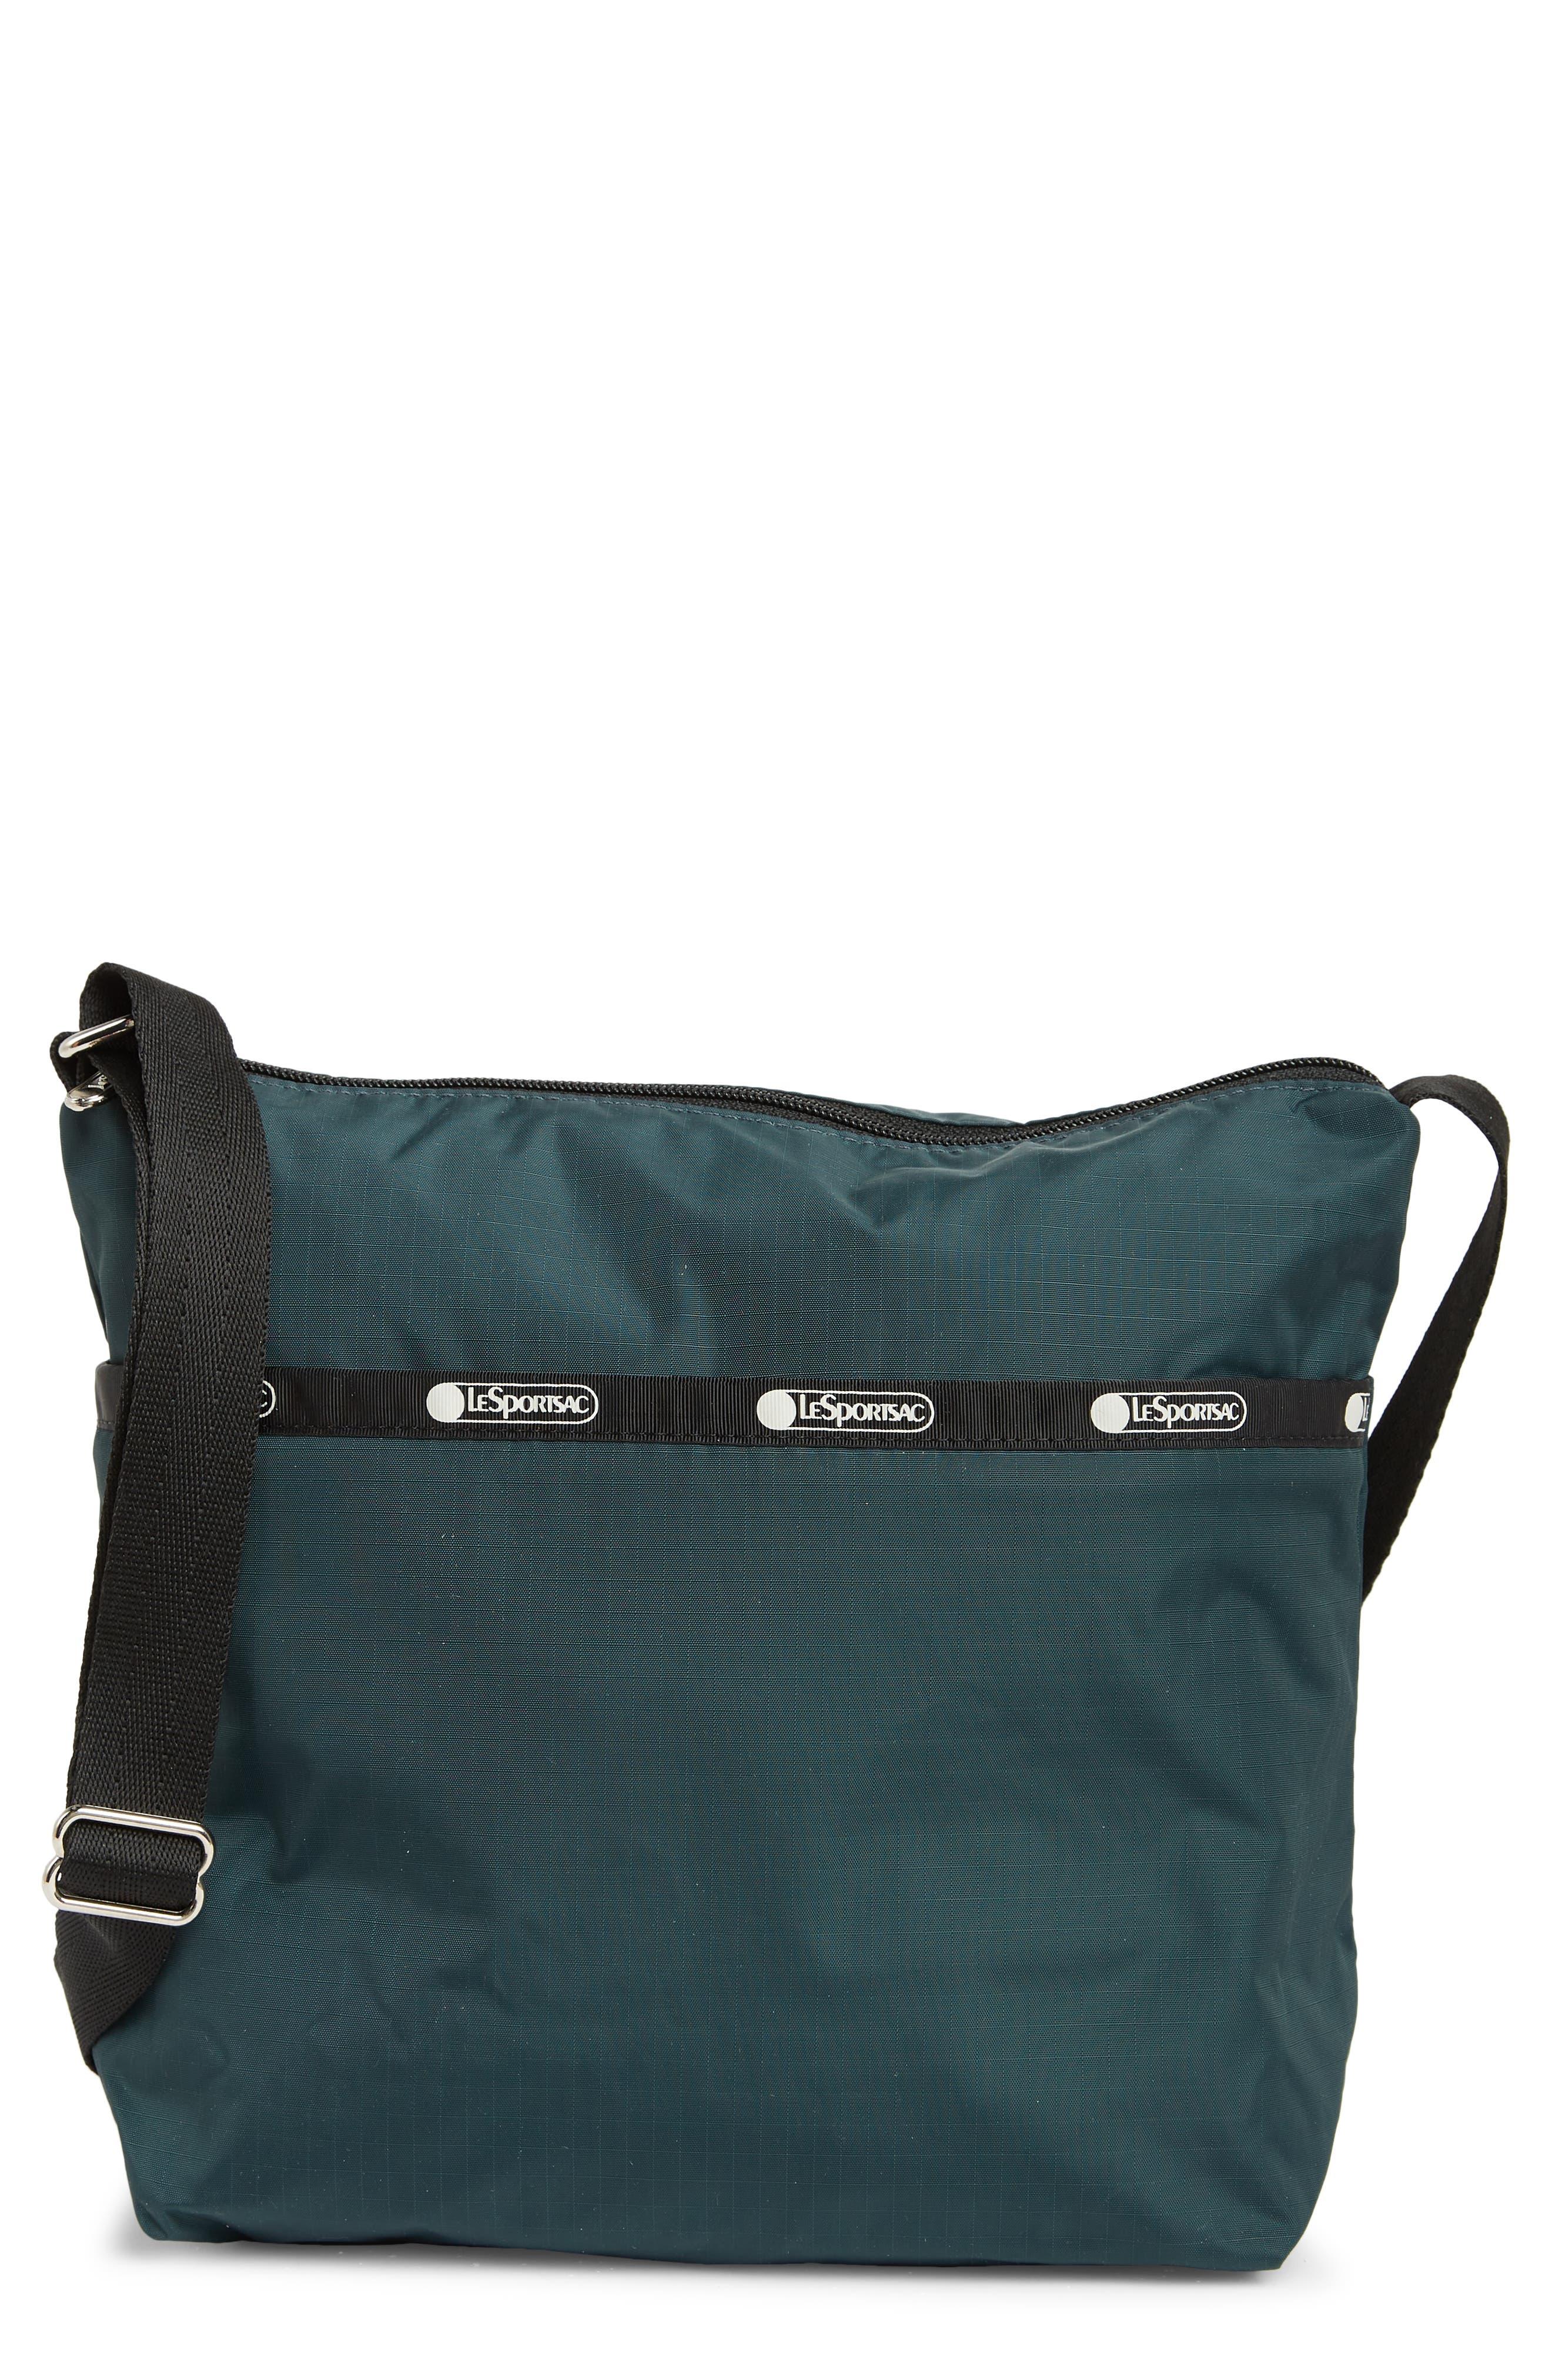 LeSportsac Small Cleo Crossbody Bag In Emerald 224 At Nordstrom